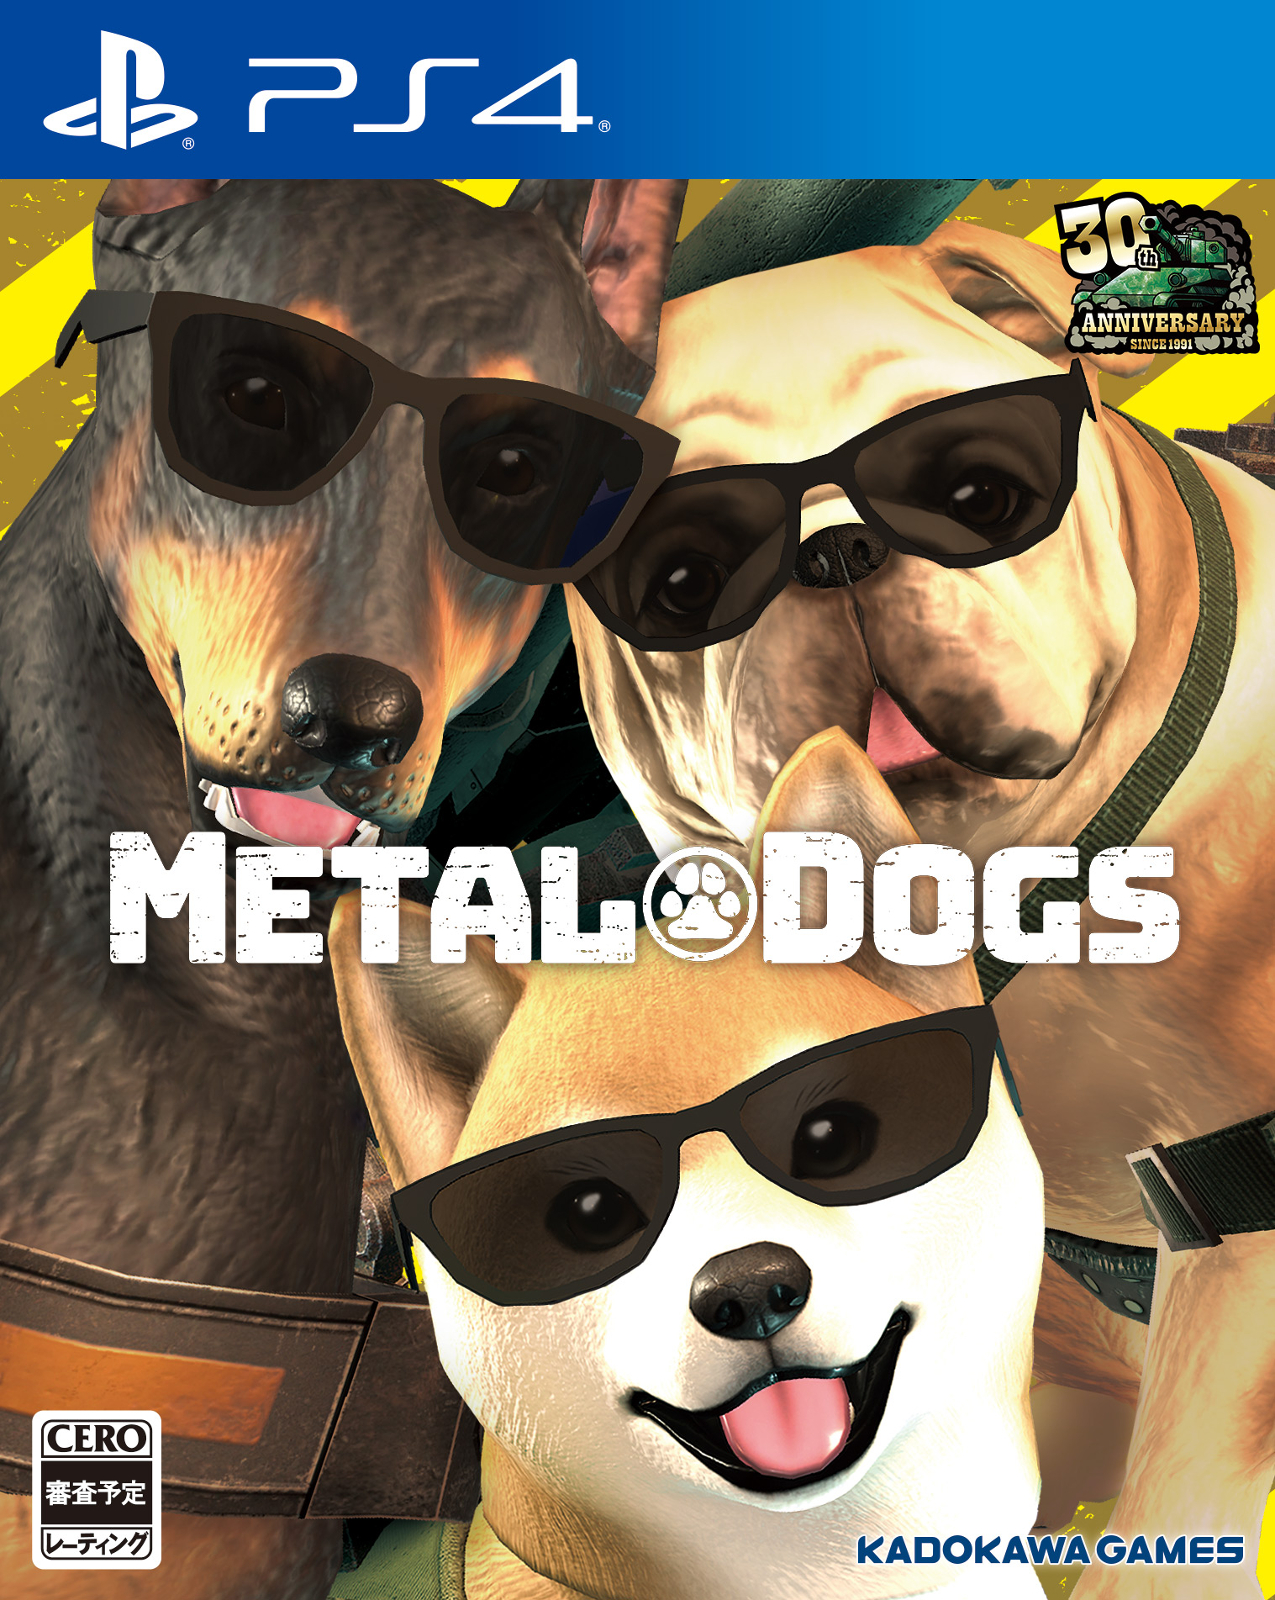 METAL DOGS on Steam